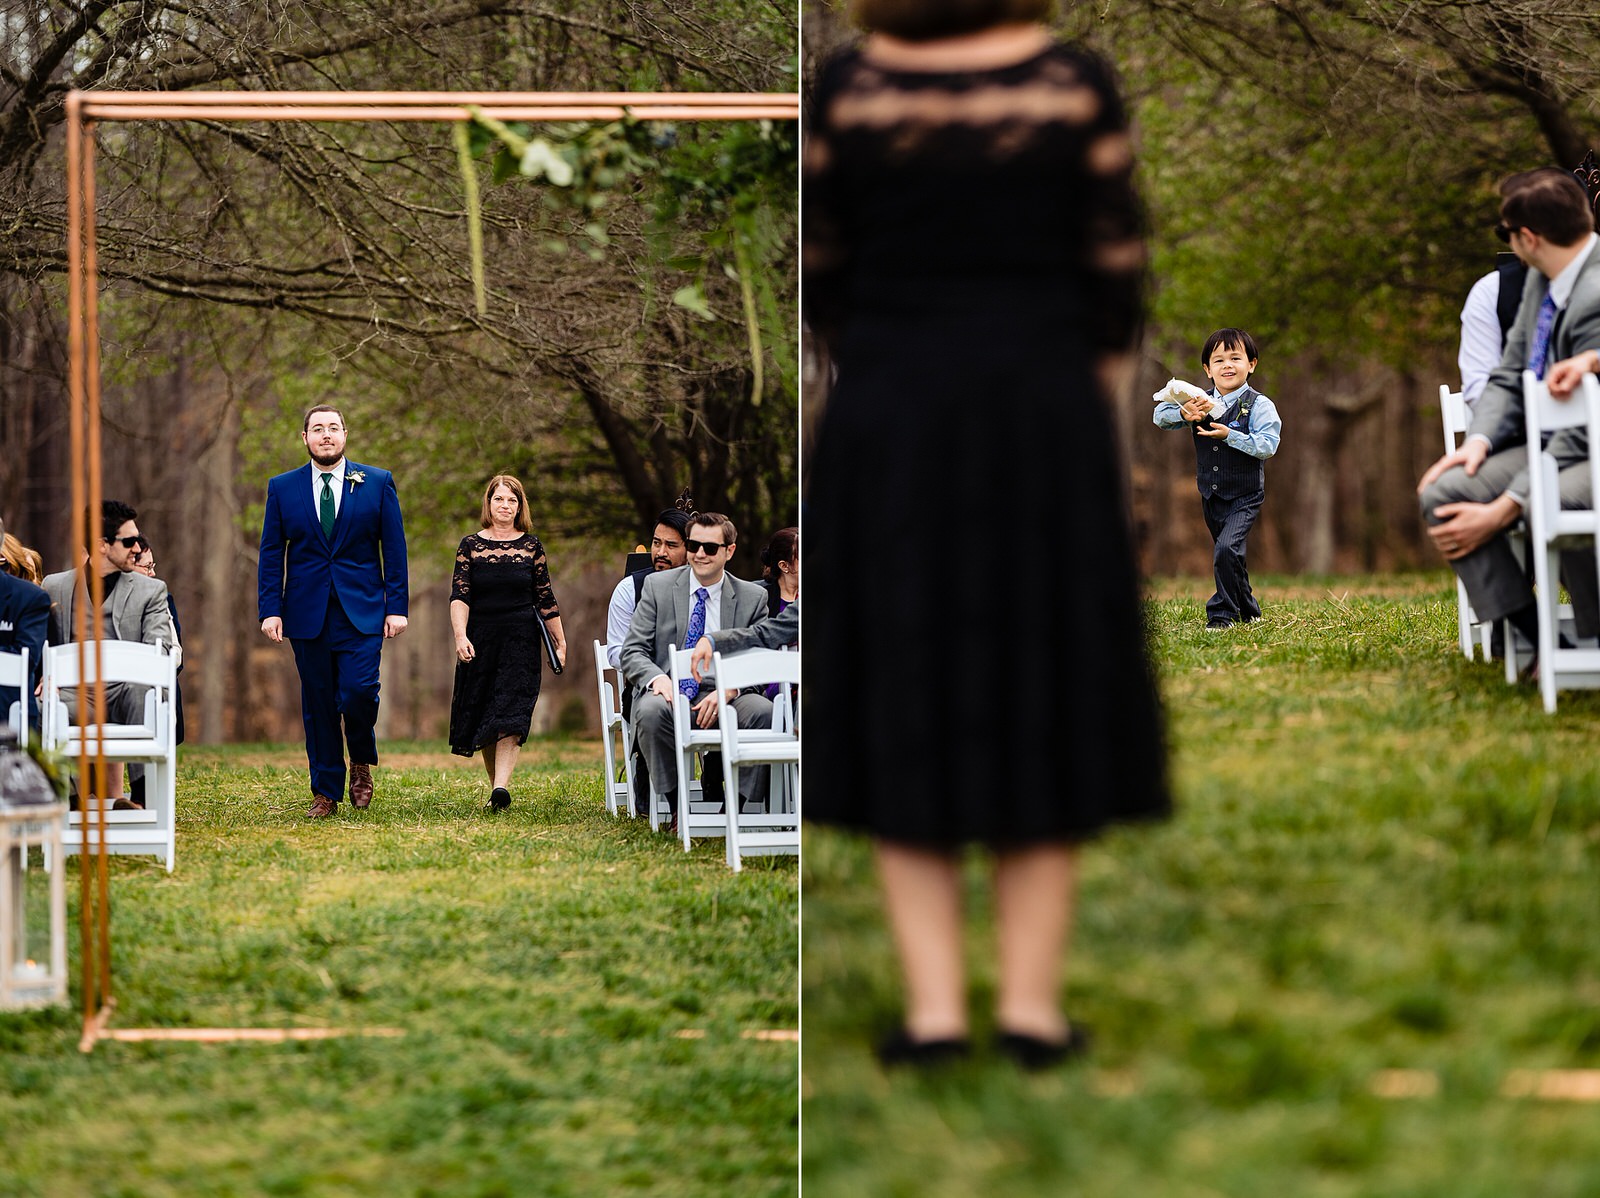 Groom, officiant, and ring bearer process down the aisle of an outdoor wedding ceremony at The Meadows Raleigh